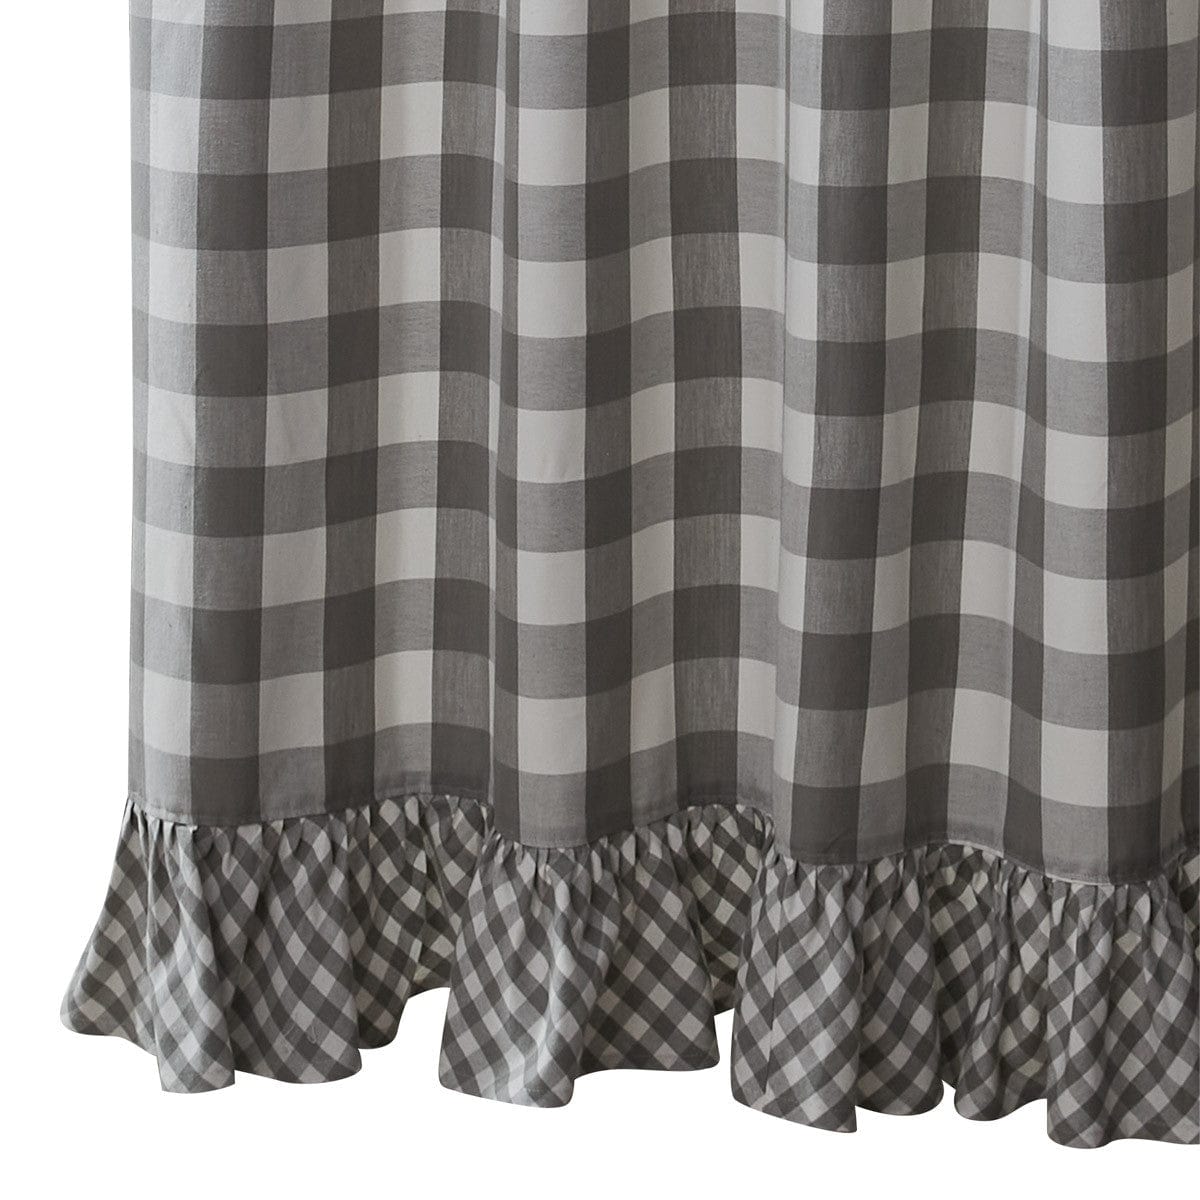 Wicklow Check in Dove Gray Ruffled Shower Curtain-Park Designs-The Village Merchant